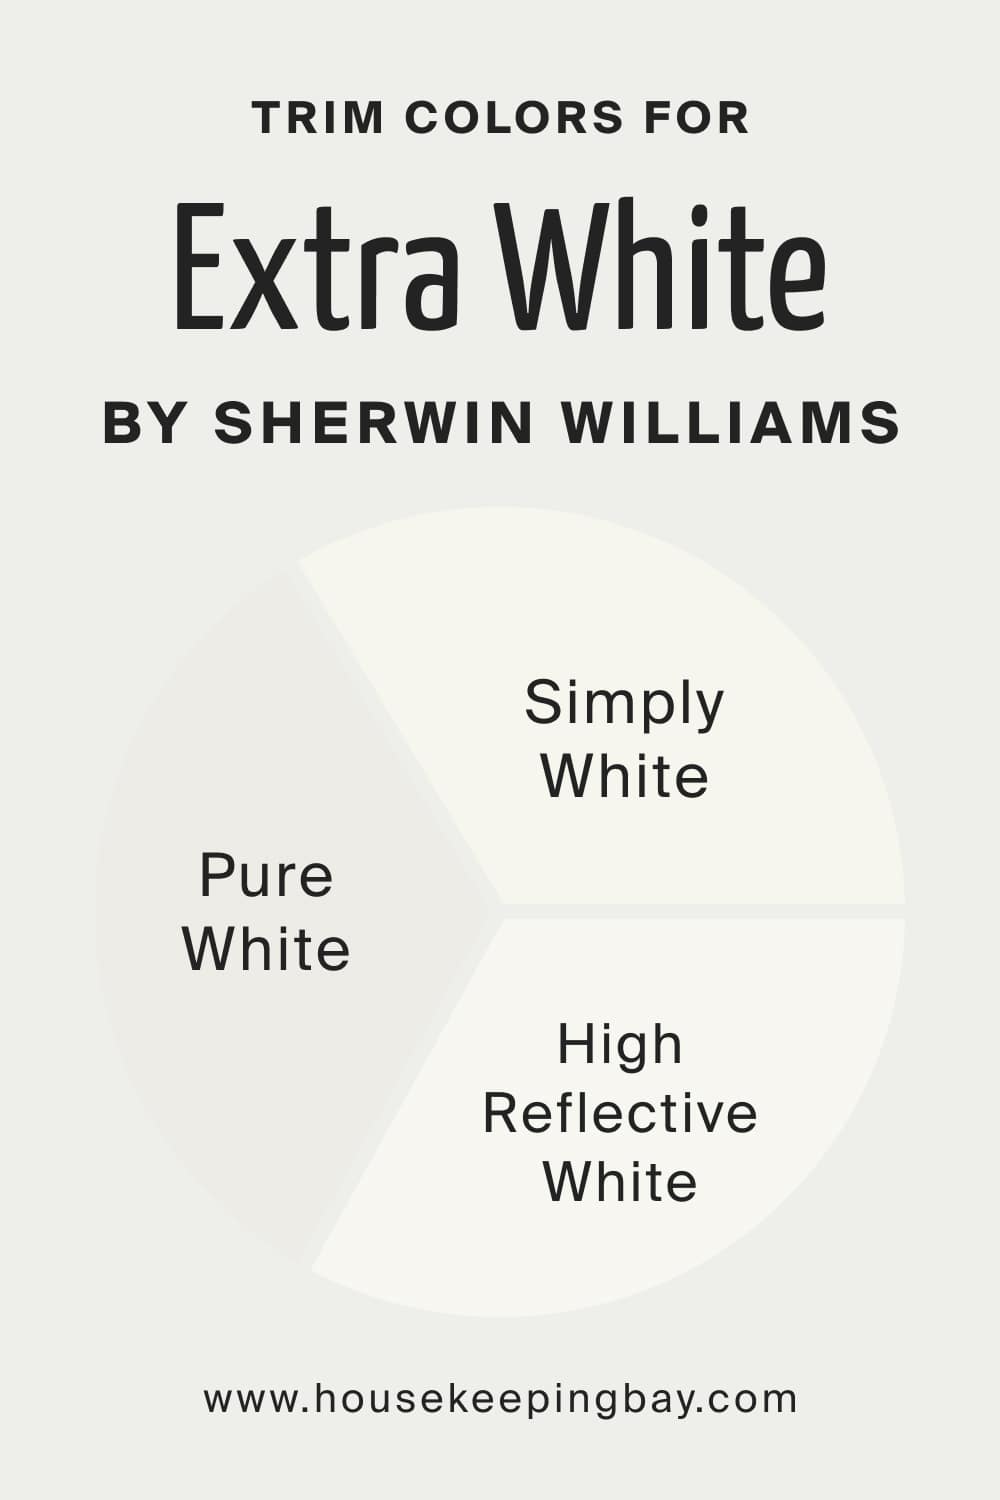 Trim Colors for Extra White SW 7006 by Sherwin Williams